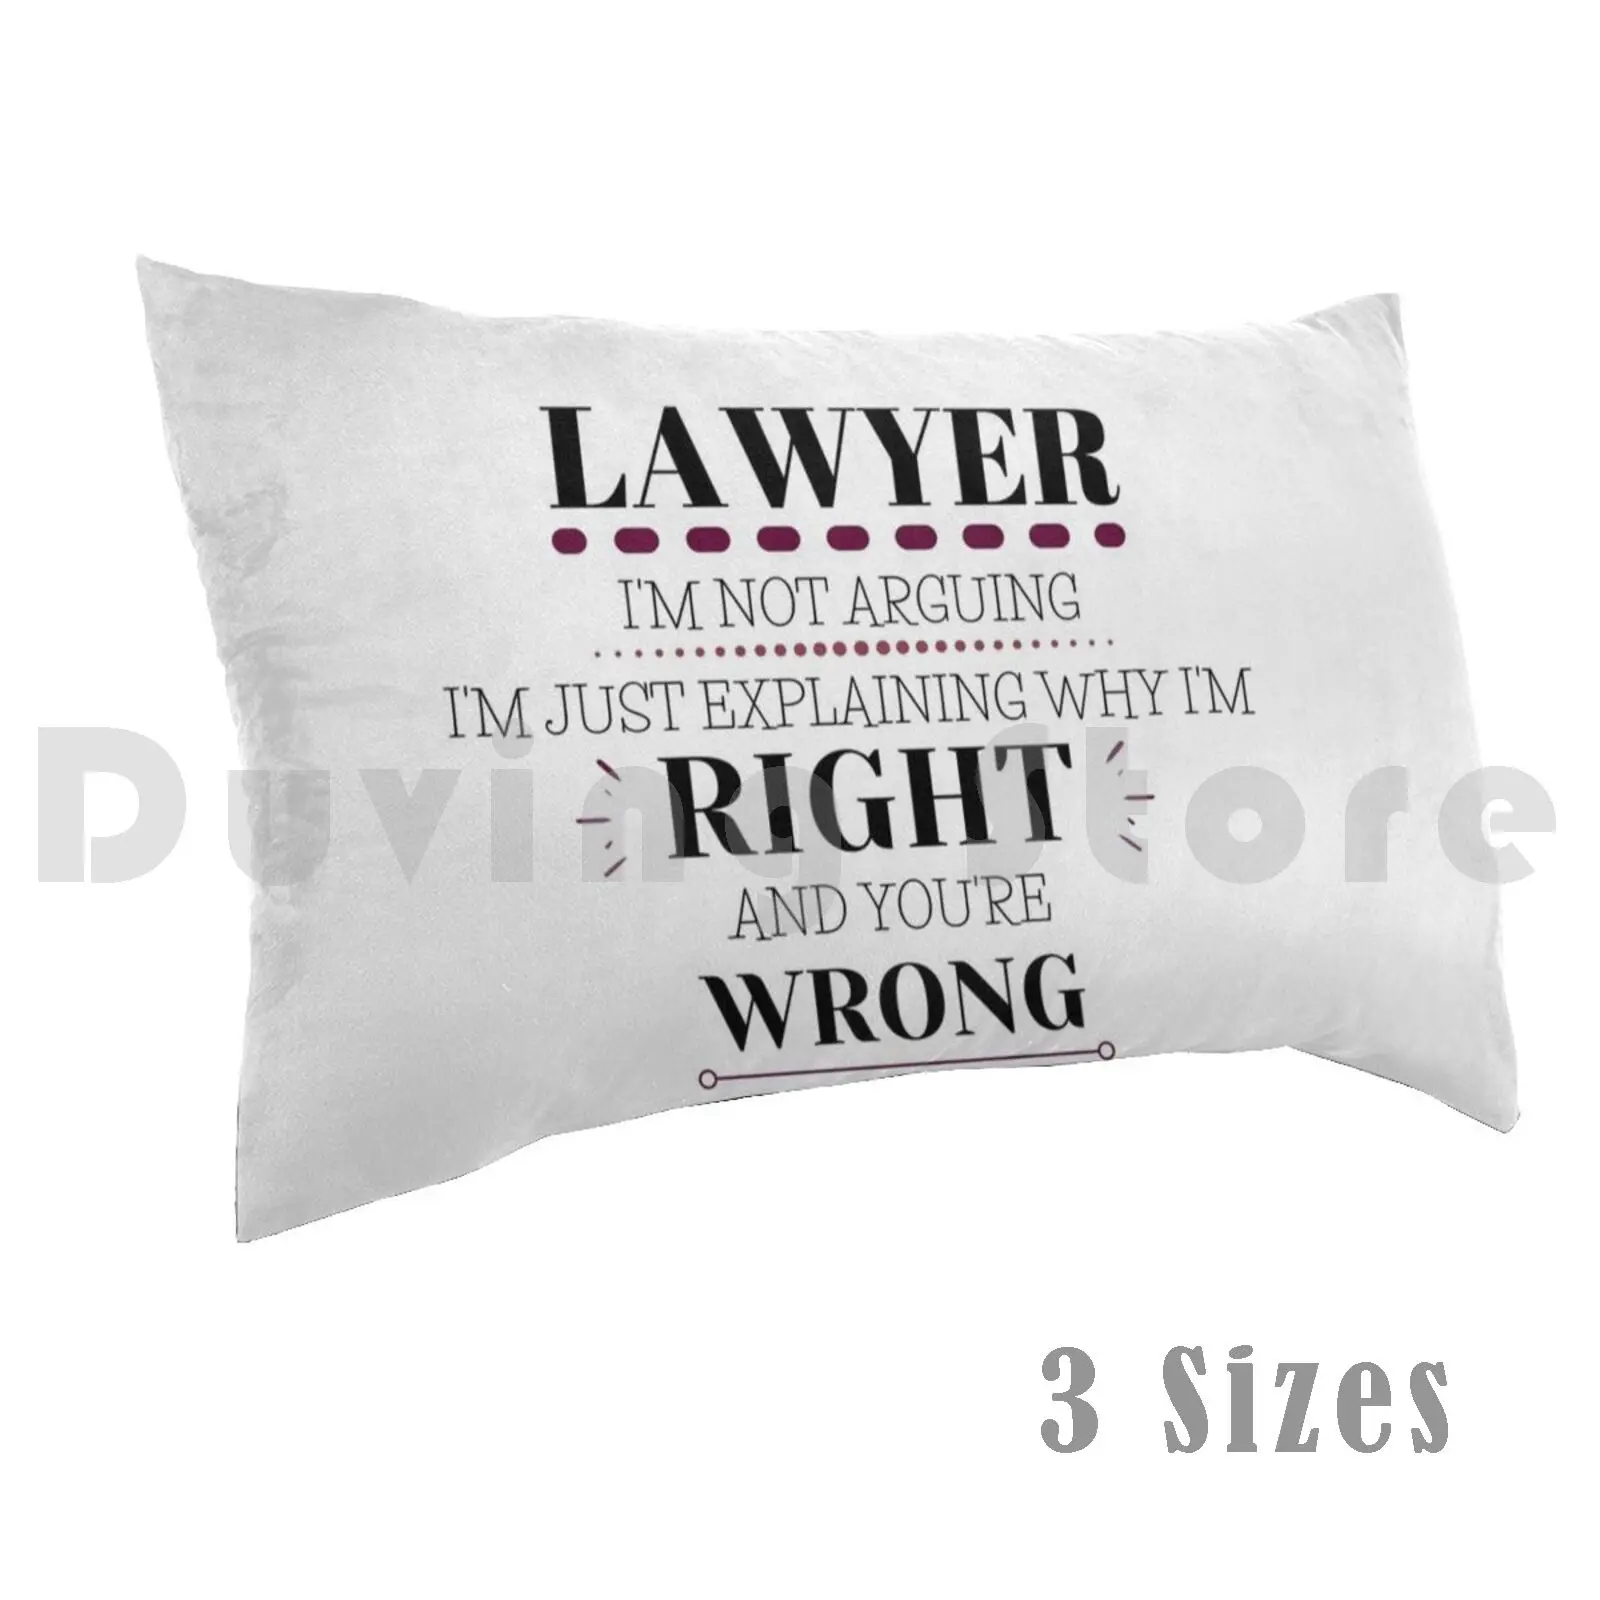 

Lawyer-I'm Right , You're Wrong Pillow Case Printed 50x75 Law Lawyer Law School Arguing Im Right Youre